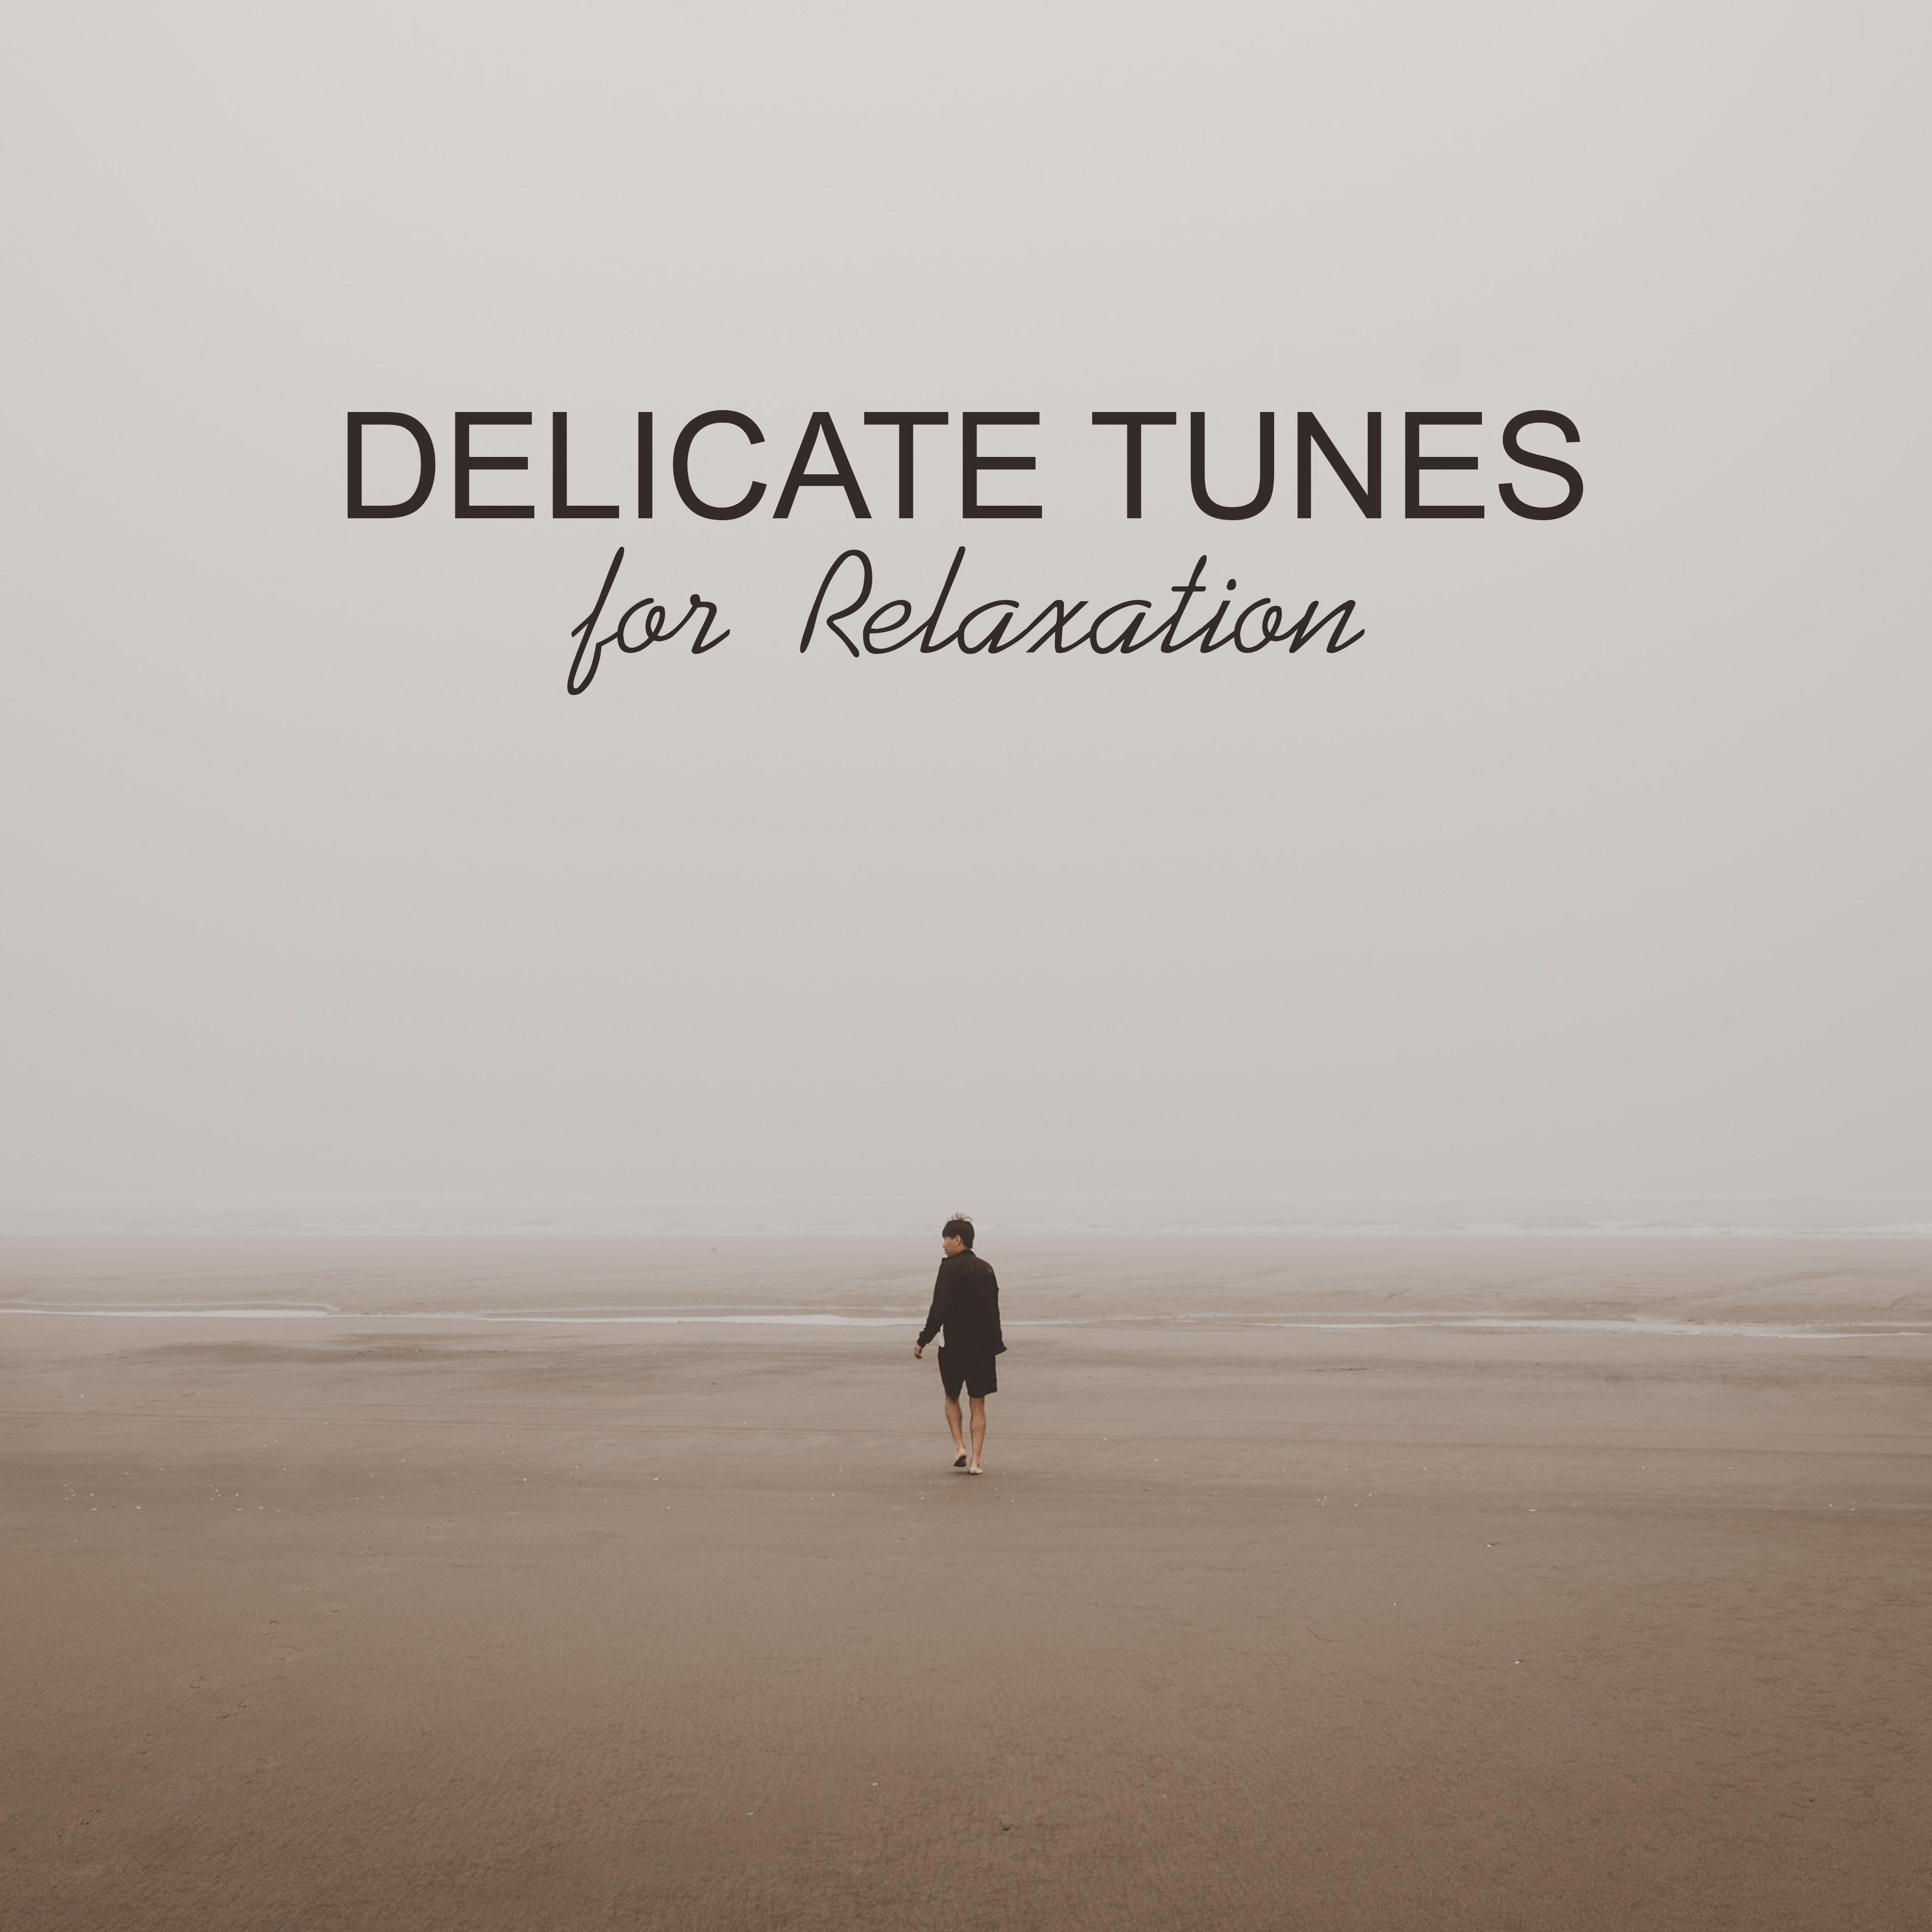 Delicate Tunes for Relaxation